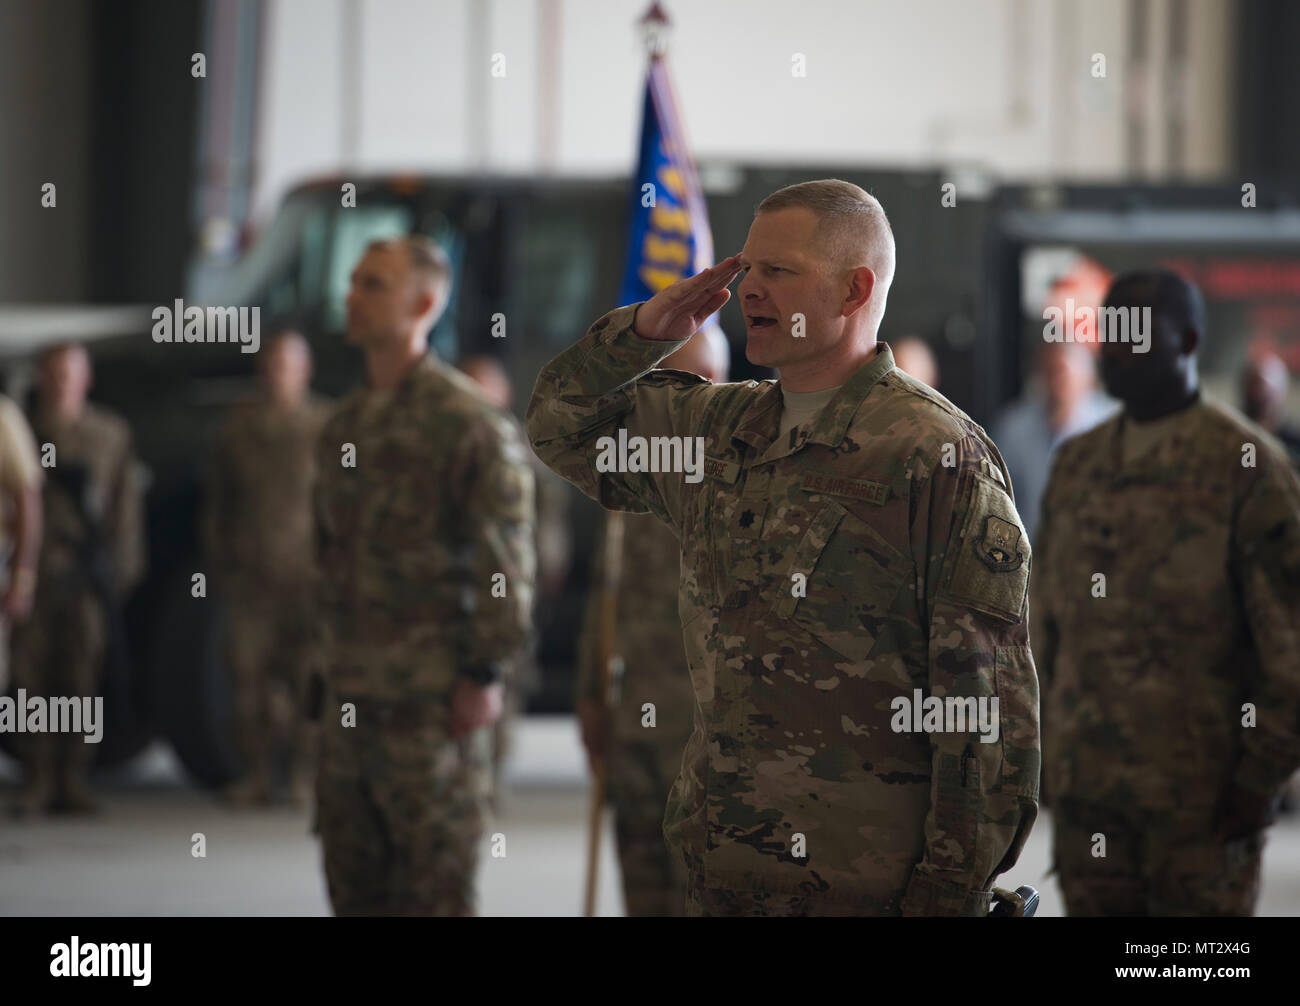 Lt. Col. Elton Sledge, the 455th Expeditionary Mission Support Group deputy commander, renders a salute during the 455th EMSG change of command ceremony at Bagram Airfield, Afghanistan, July 20, 2017. During the ceremony, Col. Bradford Coley relinquished command of the 455th EMSG to Col. Phillip Noltemeyer. (U.S. Air Force photo by Staff Sgt. Benjamin Gonsier) Stock Photo